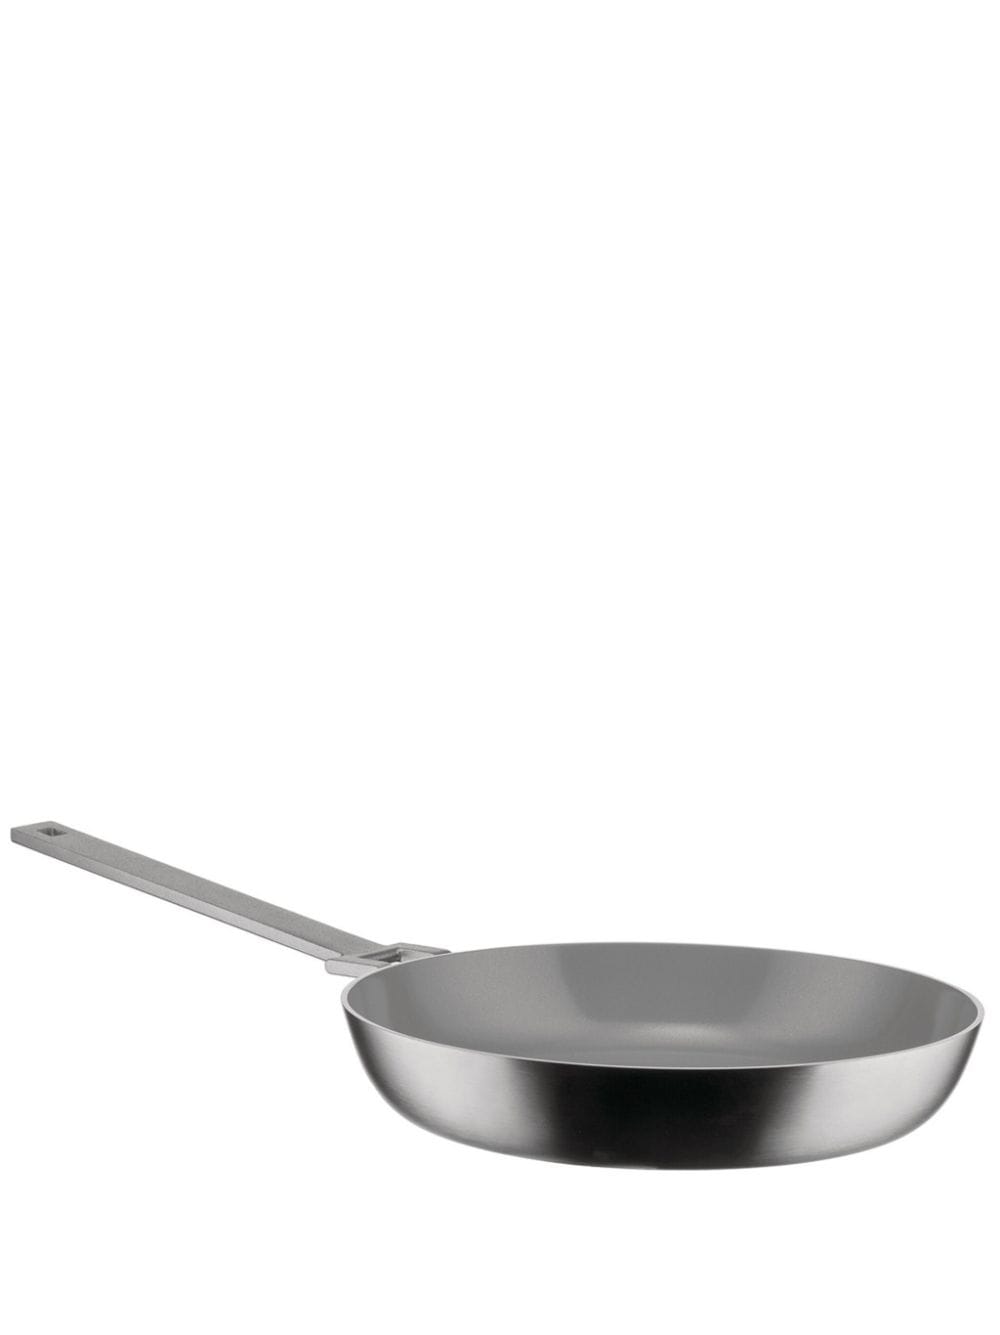 Alessi La Cintura di Orione stainless steel frying pan - Silver von Alessi